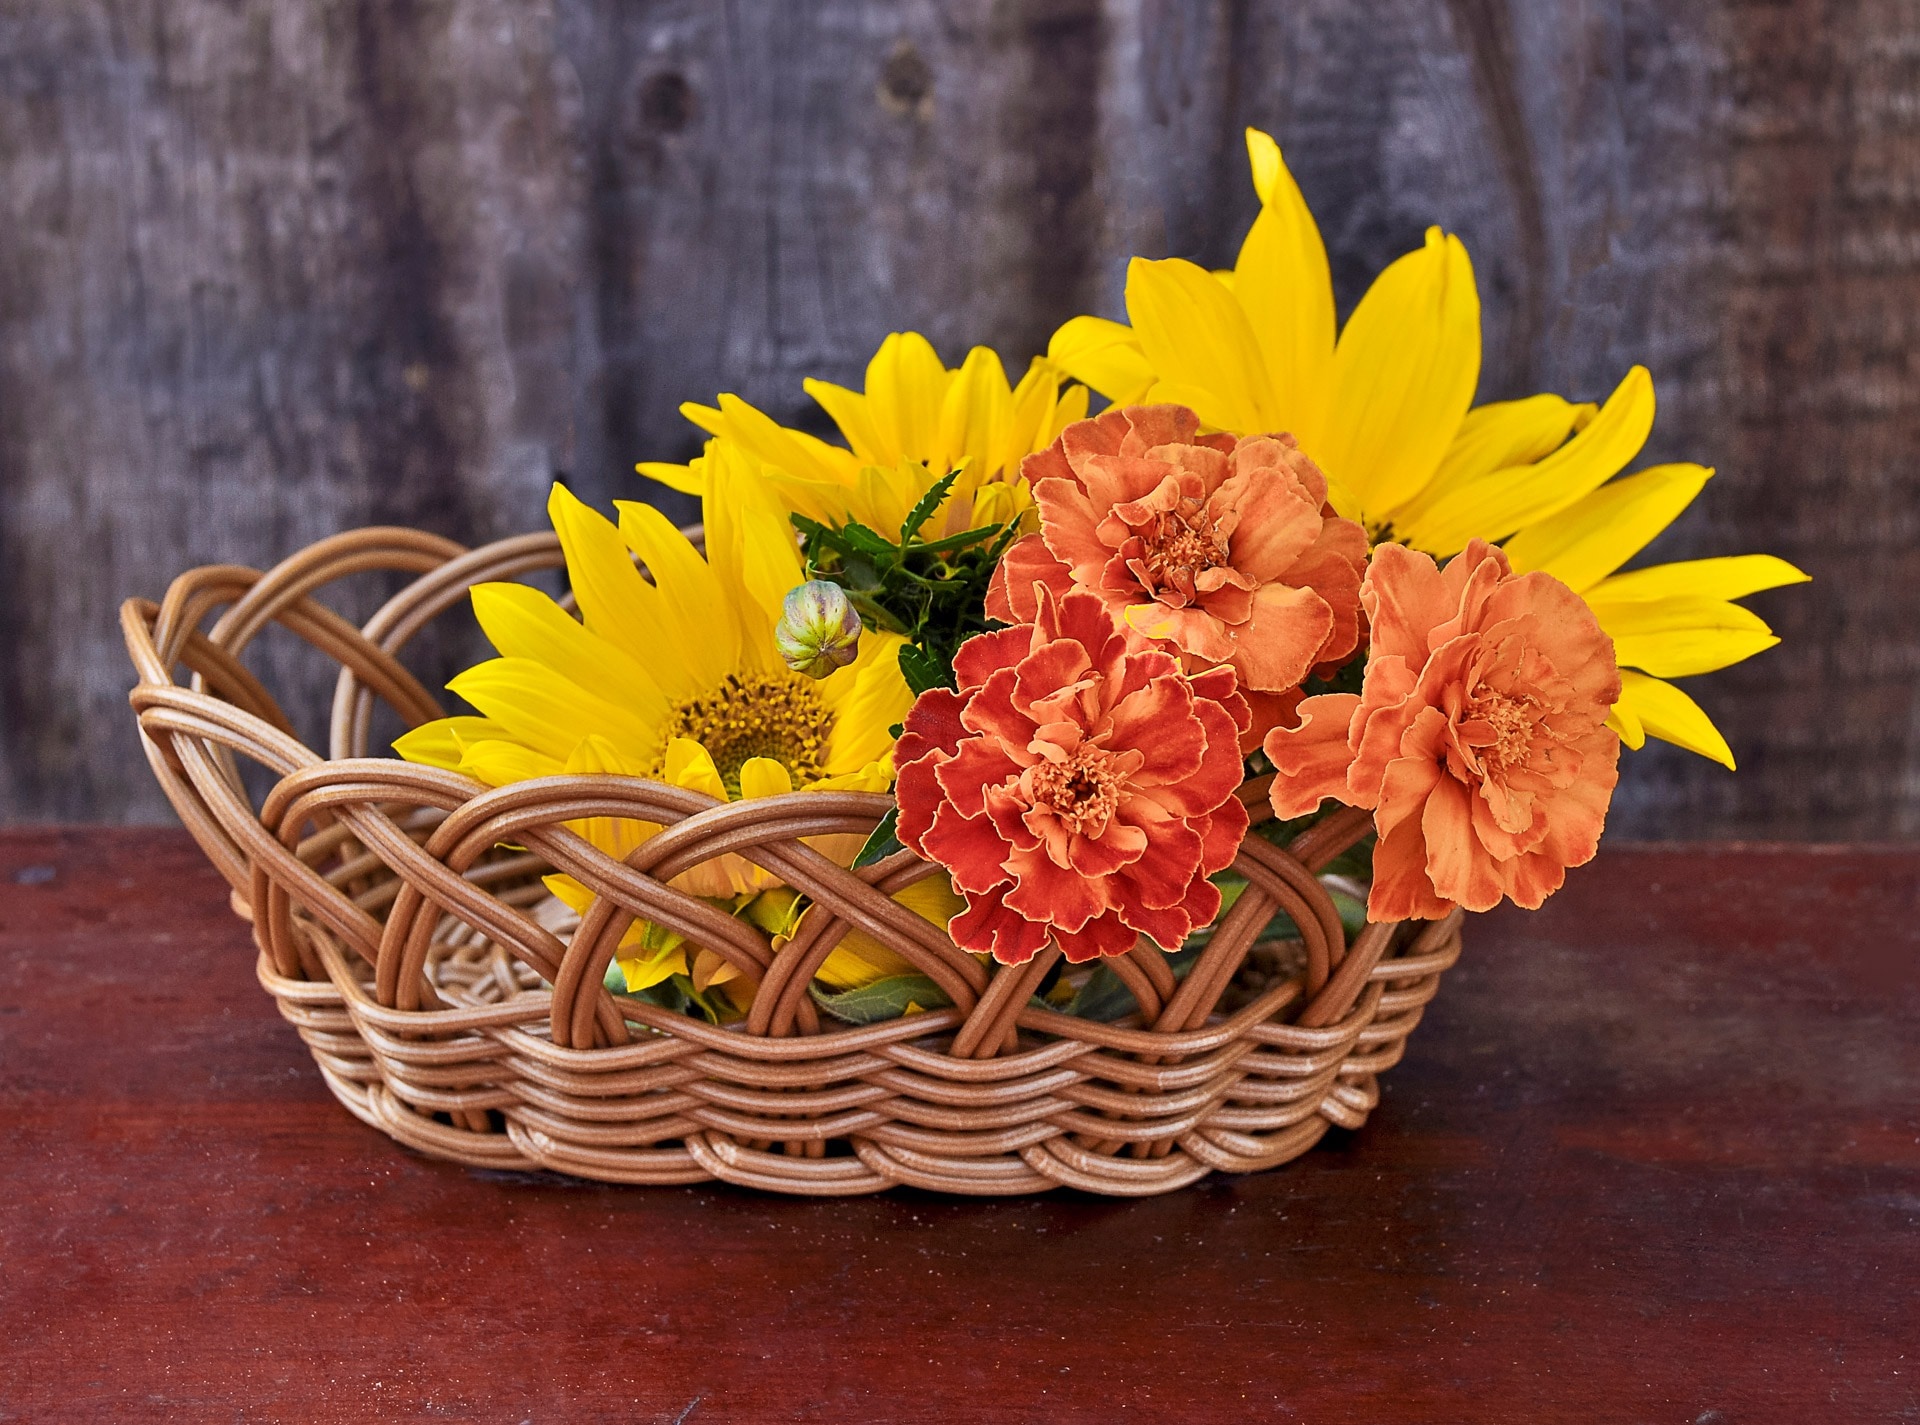 yellow and orange petaled flowers and brown woven oval basket